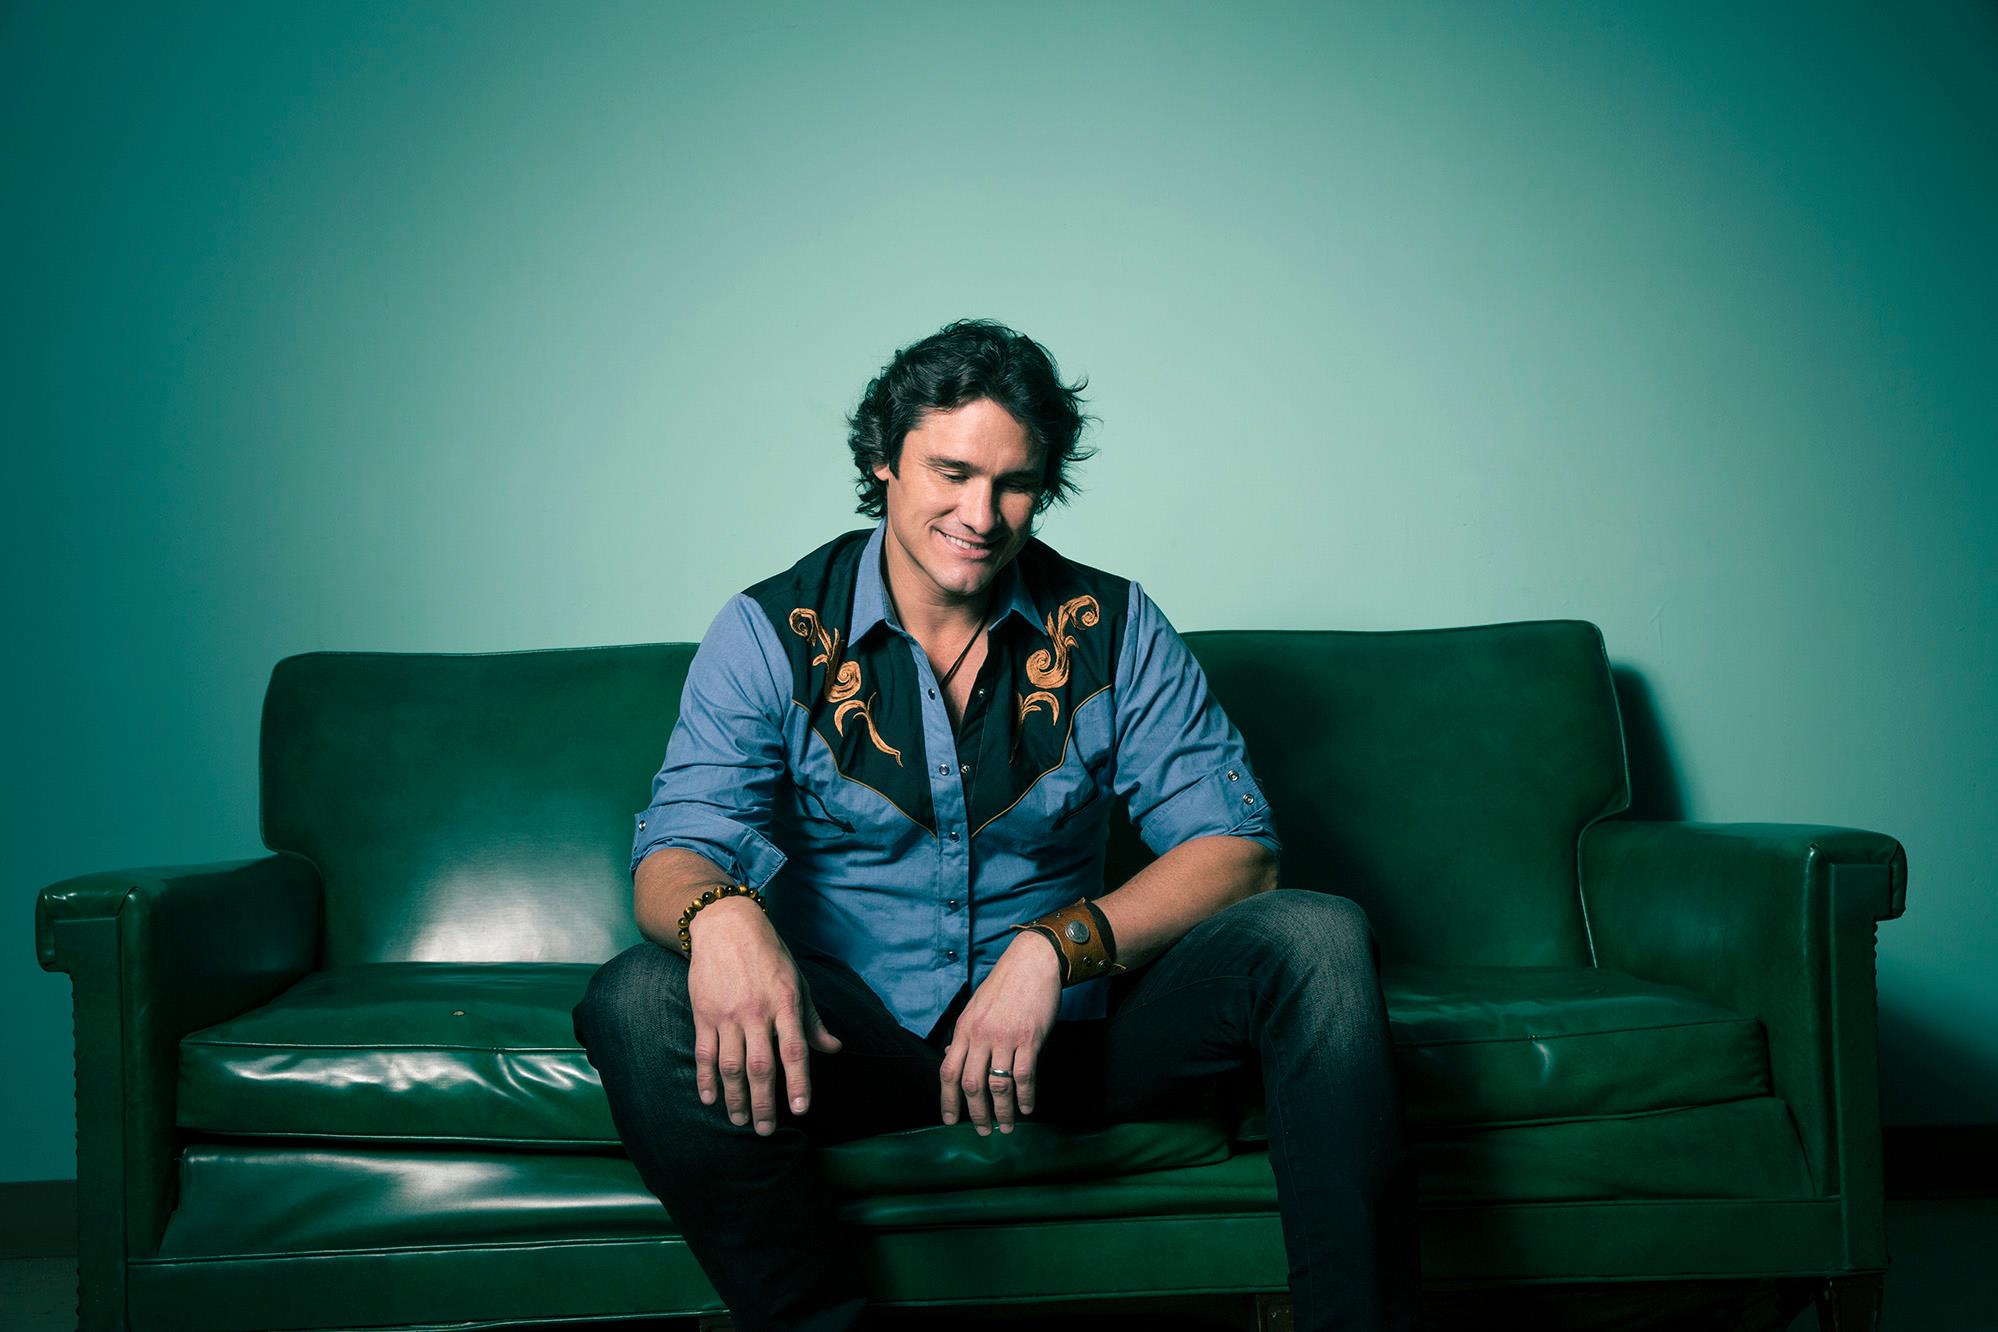 Joe Nichols Talks About His Newest Traditional Country Album “Never Gets Old”